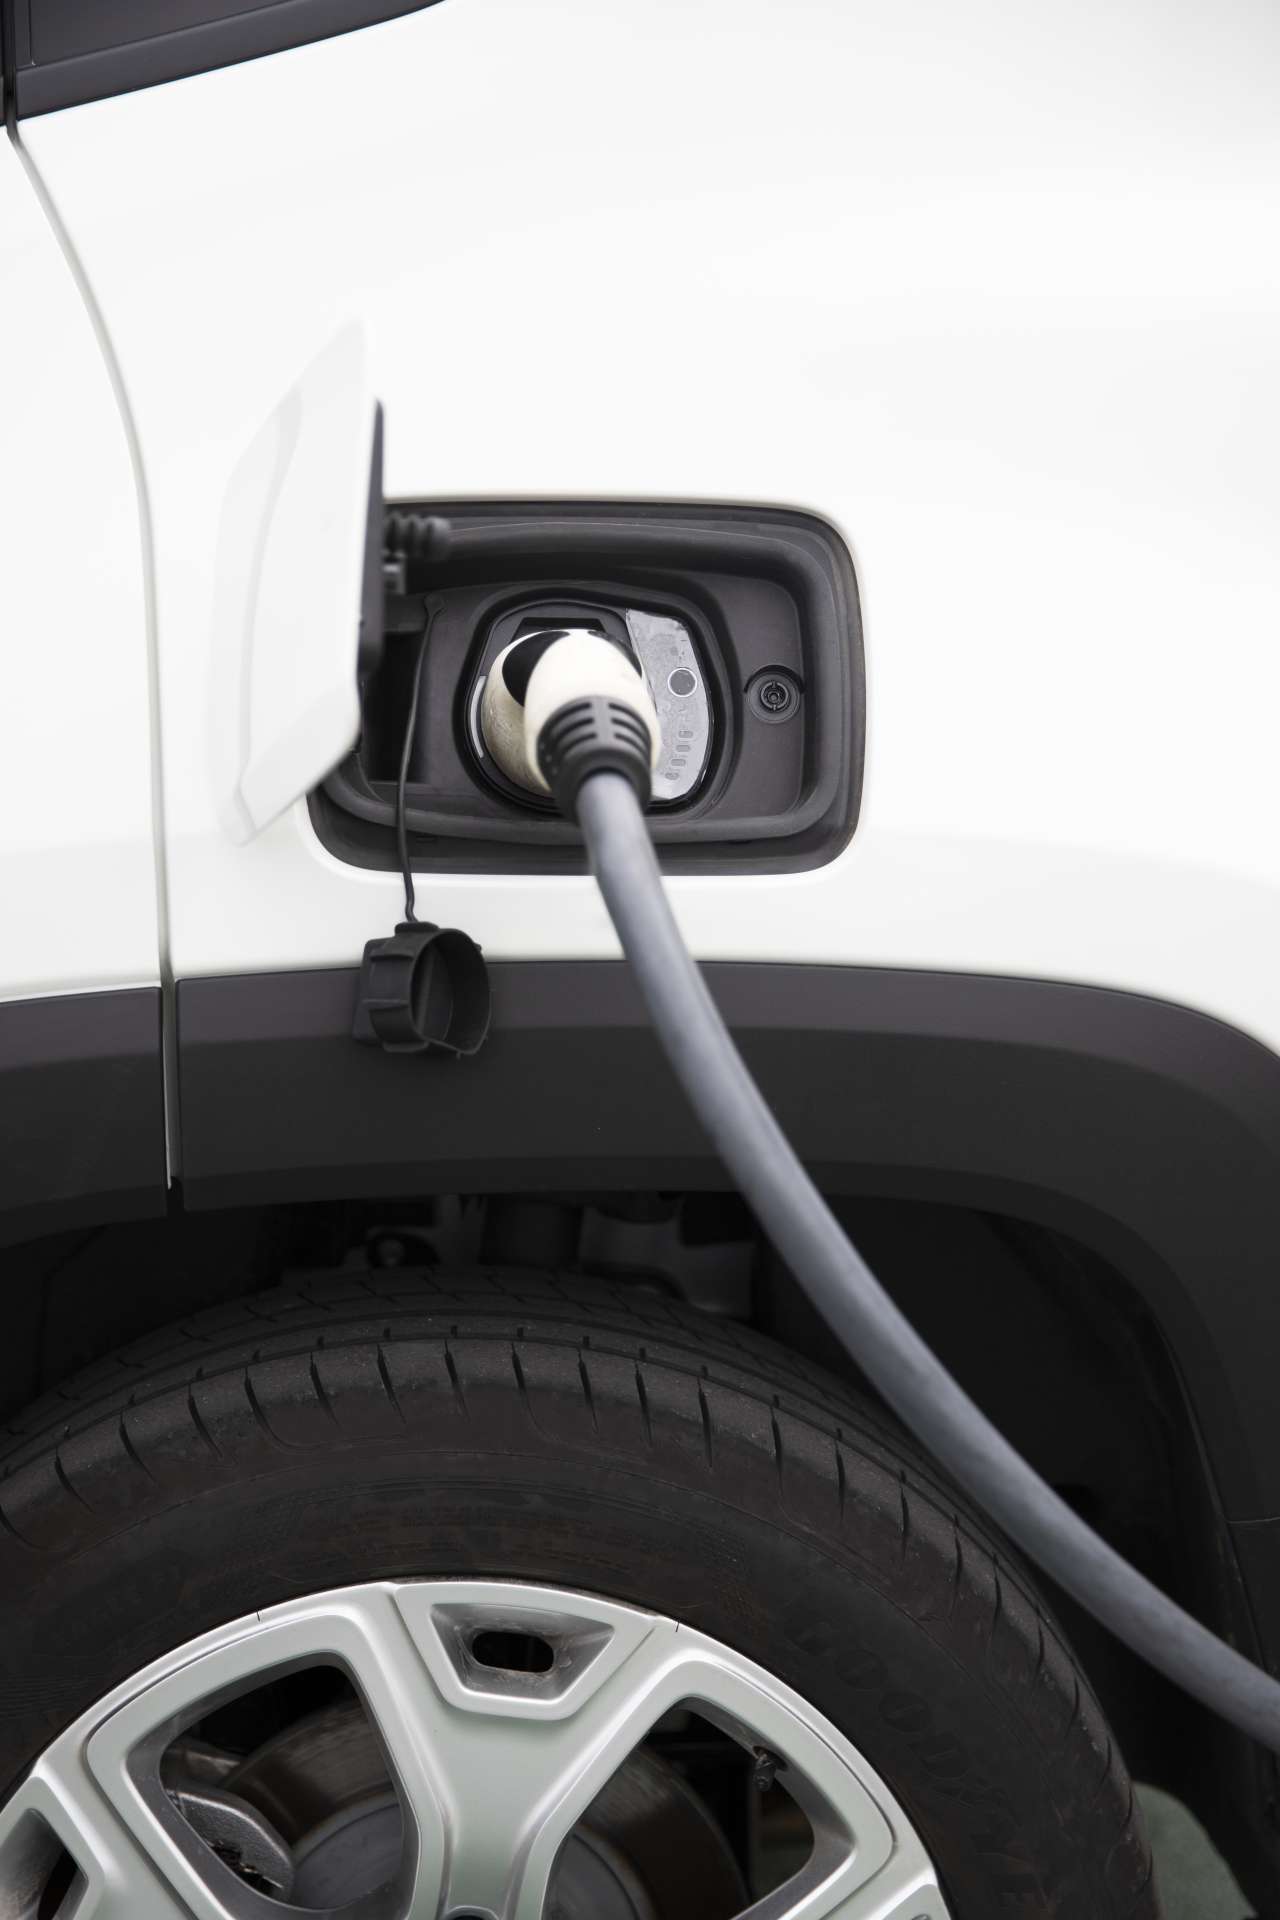 plug and charge: a new way of charging without any badge or app